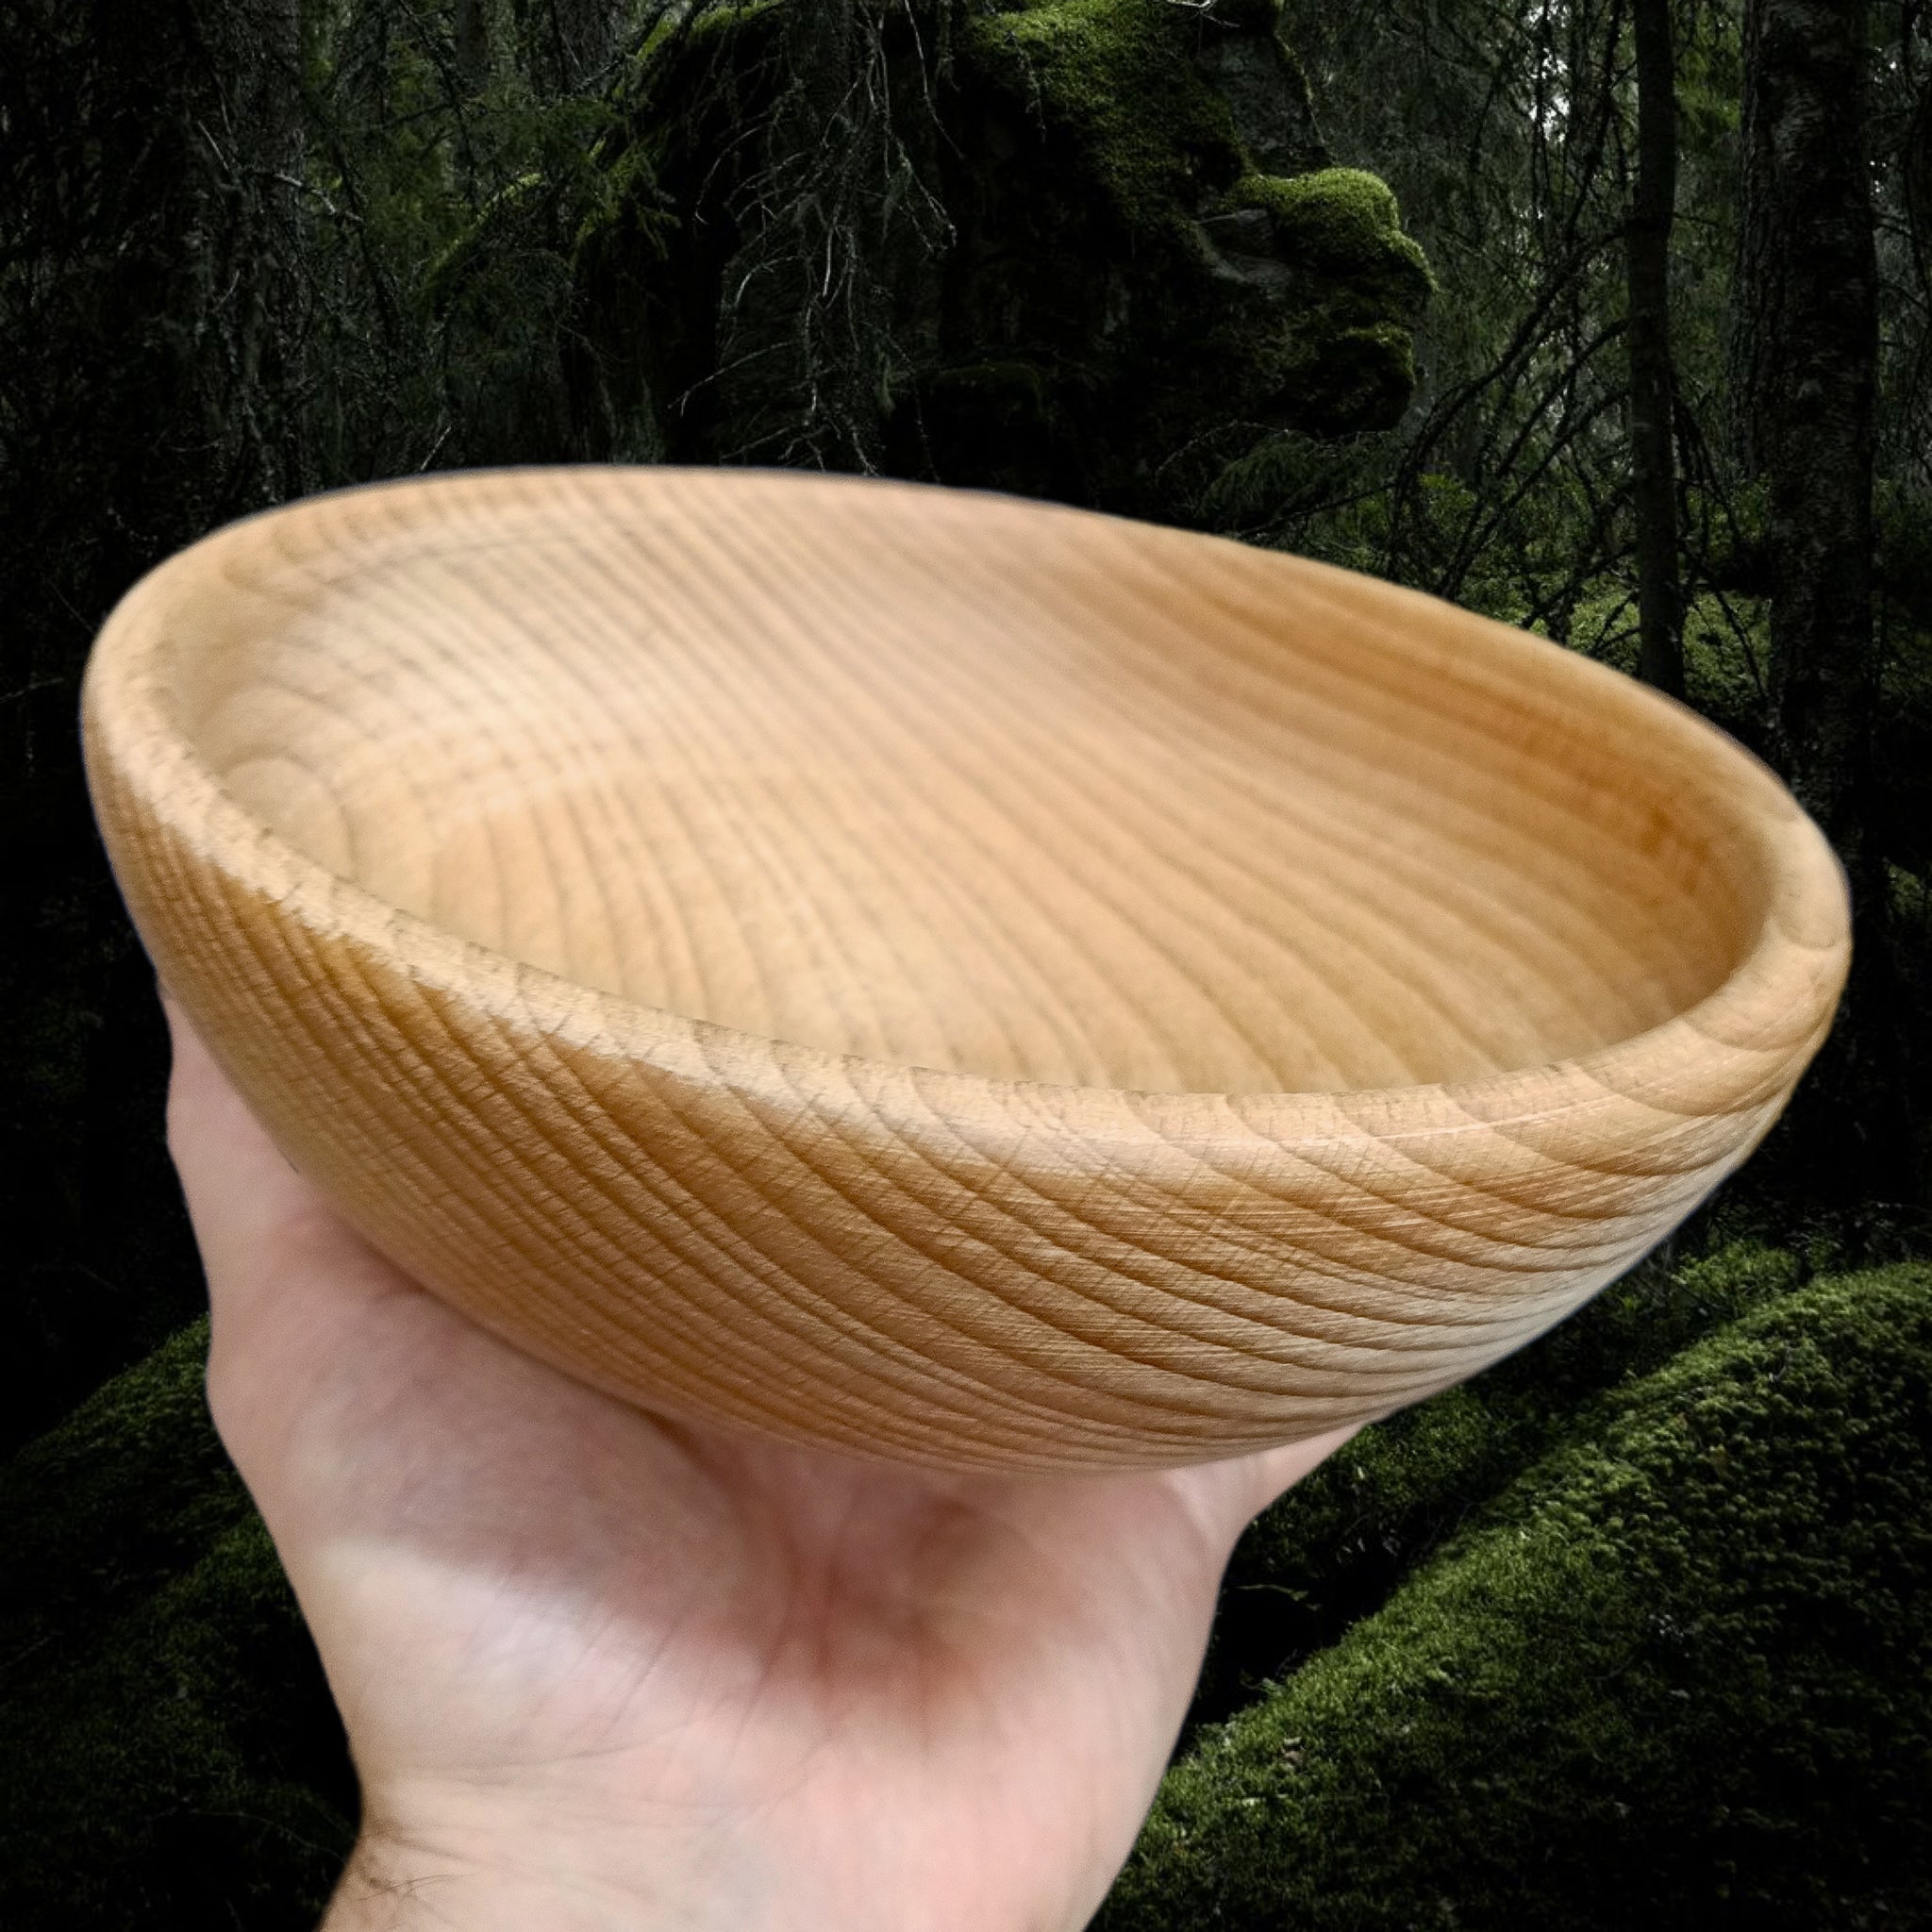 Large, Hand-Turned Medieval Wooden Bowl in Hand - Side View